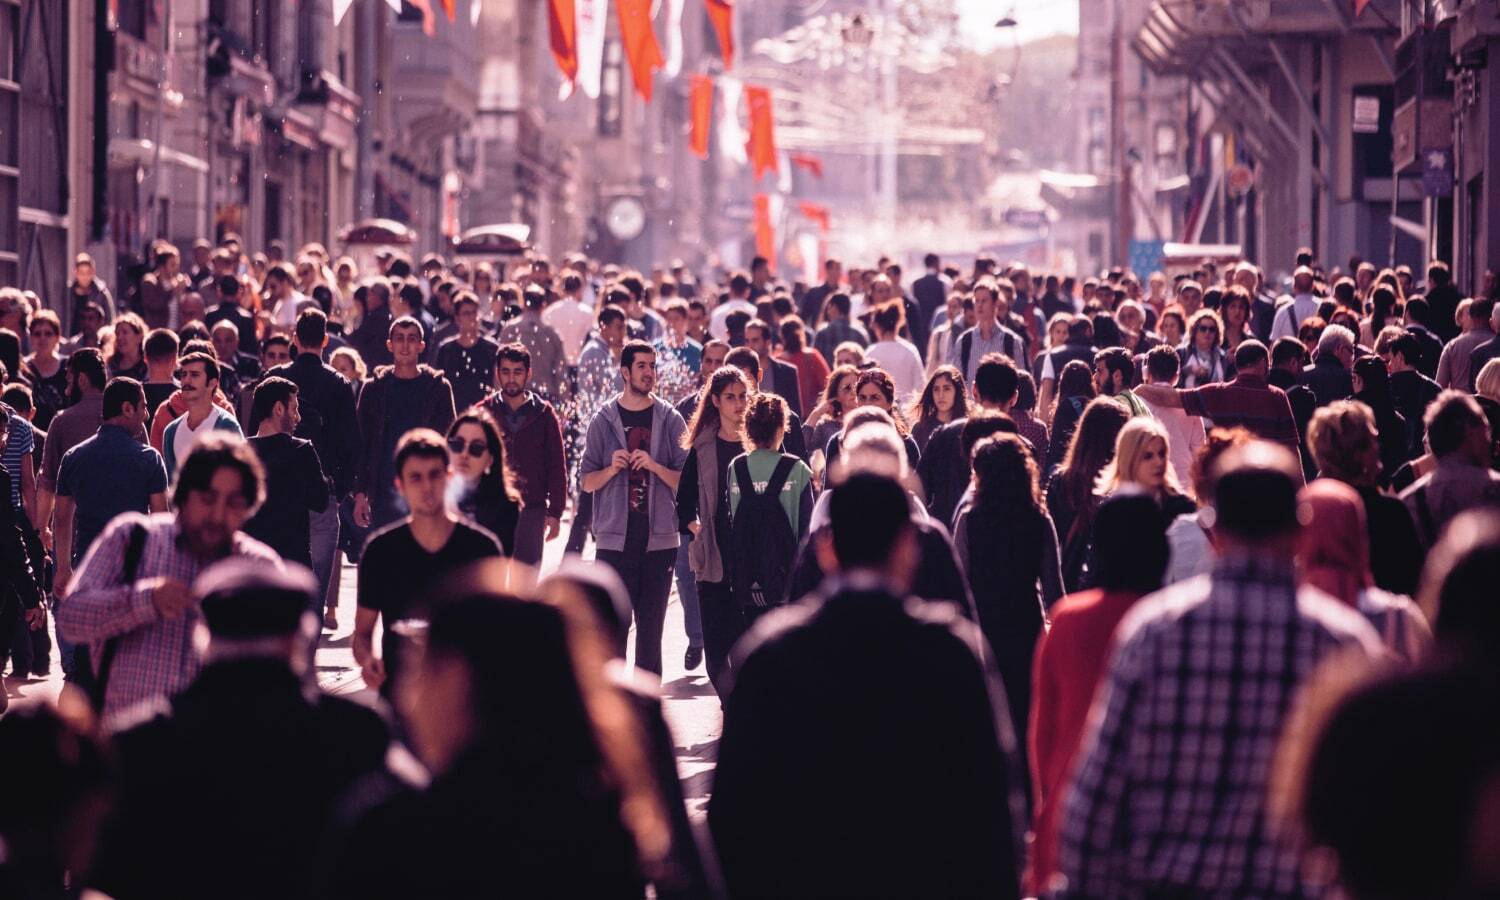 Photograph of people walking down a busy street